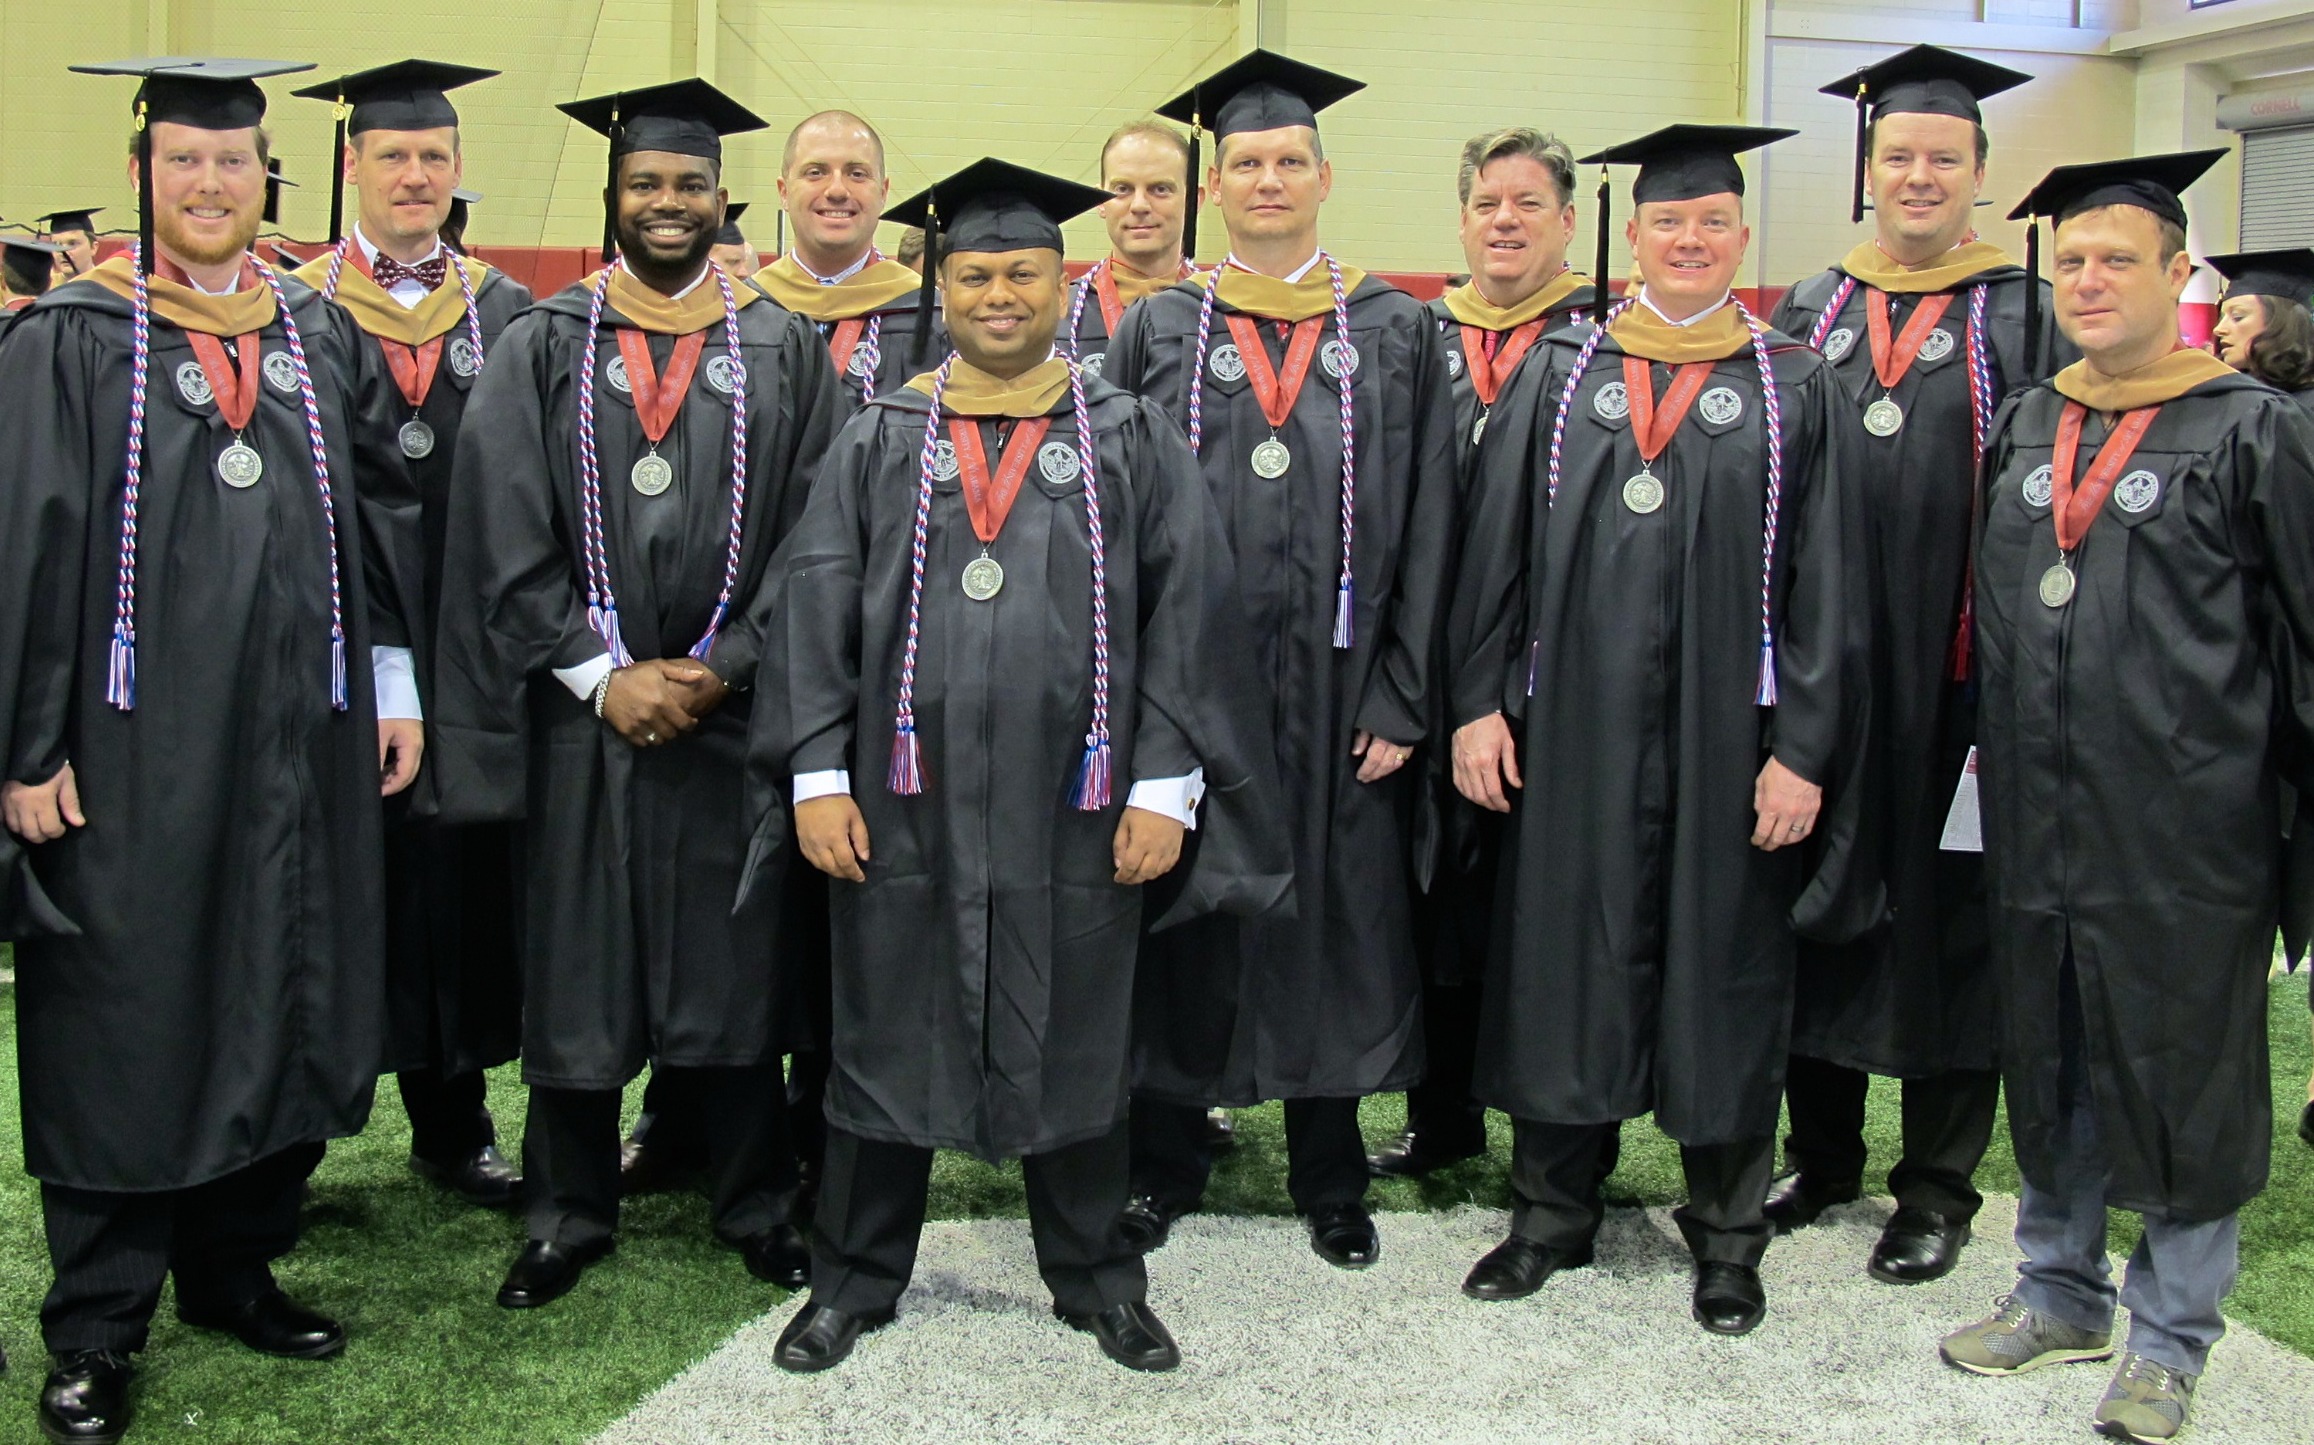 EMBA Class of 2014 Veterans at Graduation on May 3. From left to right: Scott Knighton, Brad Wood, Edward Eskridge, Matt Gardner, Ray Chowdhury, Brandon Cole, Gary Morrison, Ed Galvin, Corey Farris, Andy Tompkins, Todd Willis. Not pictured: Sonya Ogletree and Will Coulter.